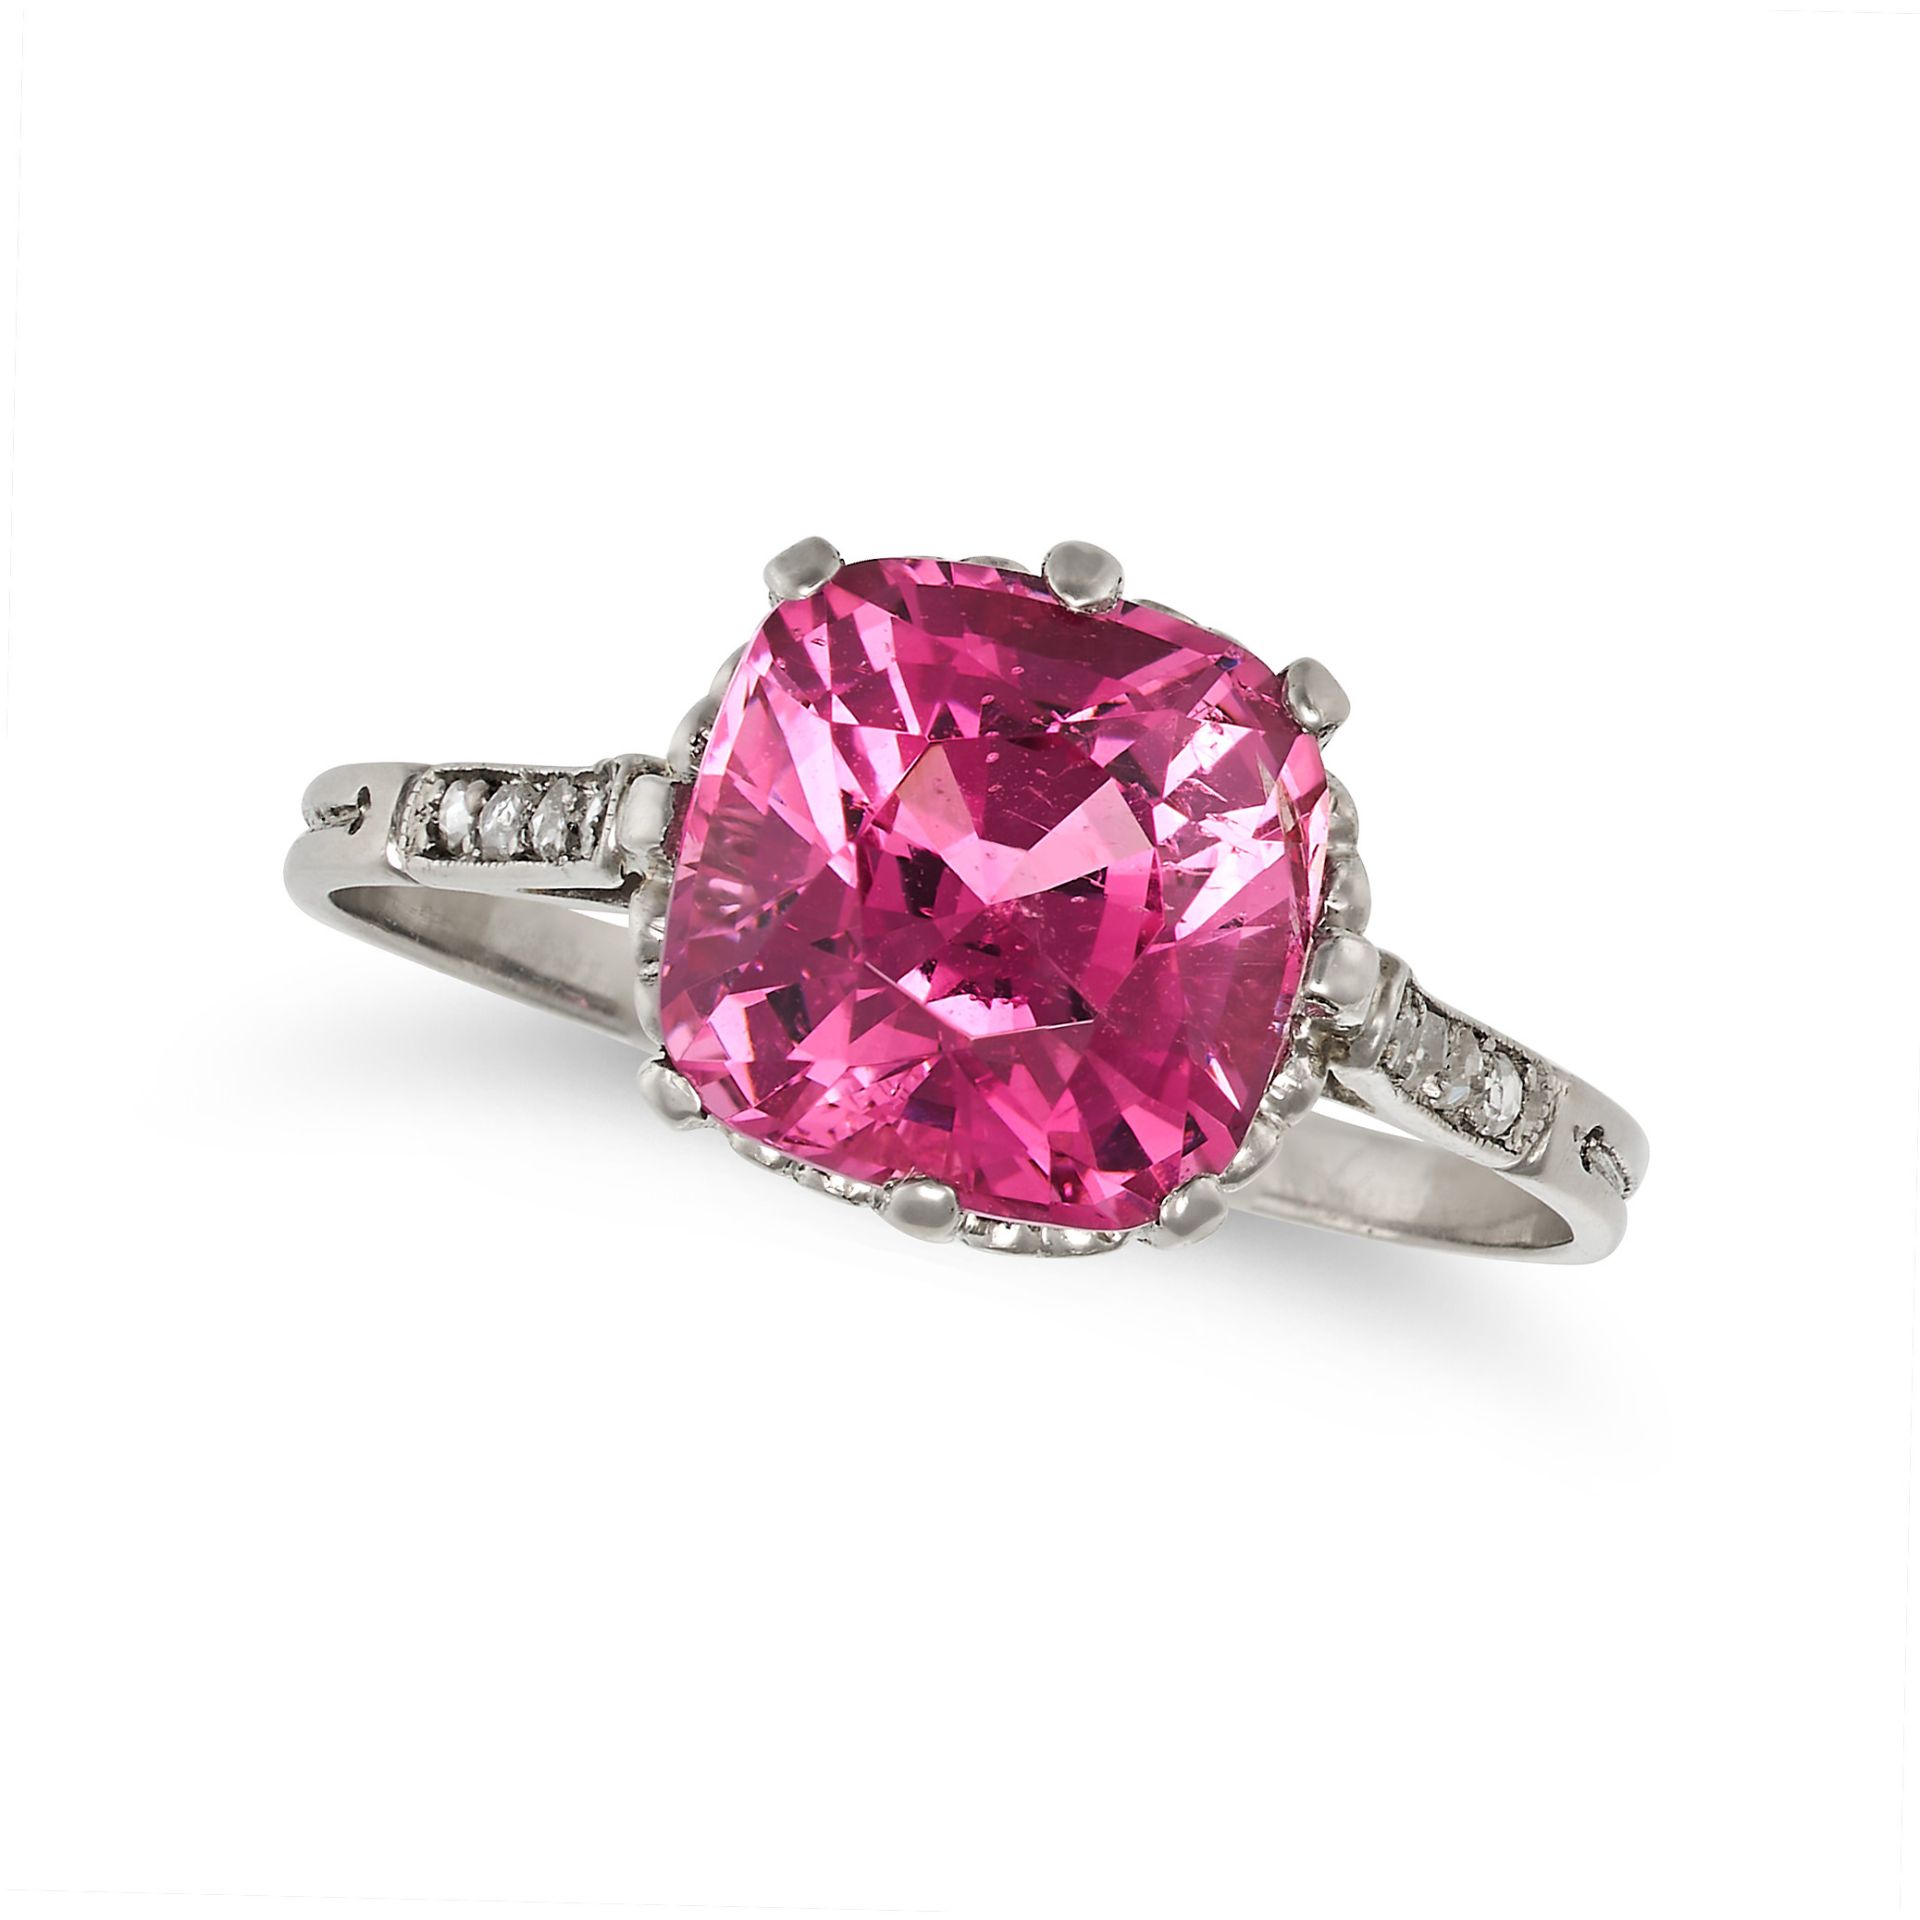 AN ANTIQUE ART DECO BURMA NO HEAT PINK SPINEL AND DIAMOND RING in platinum, set with a cushion cu...